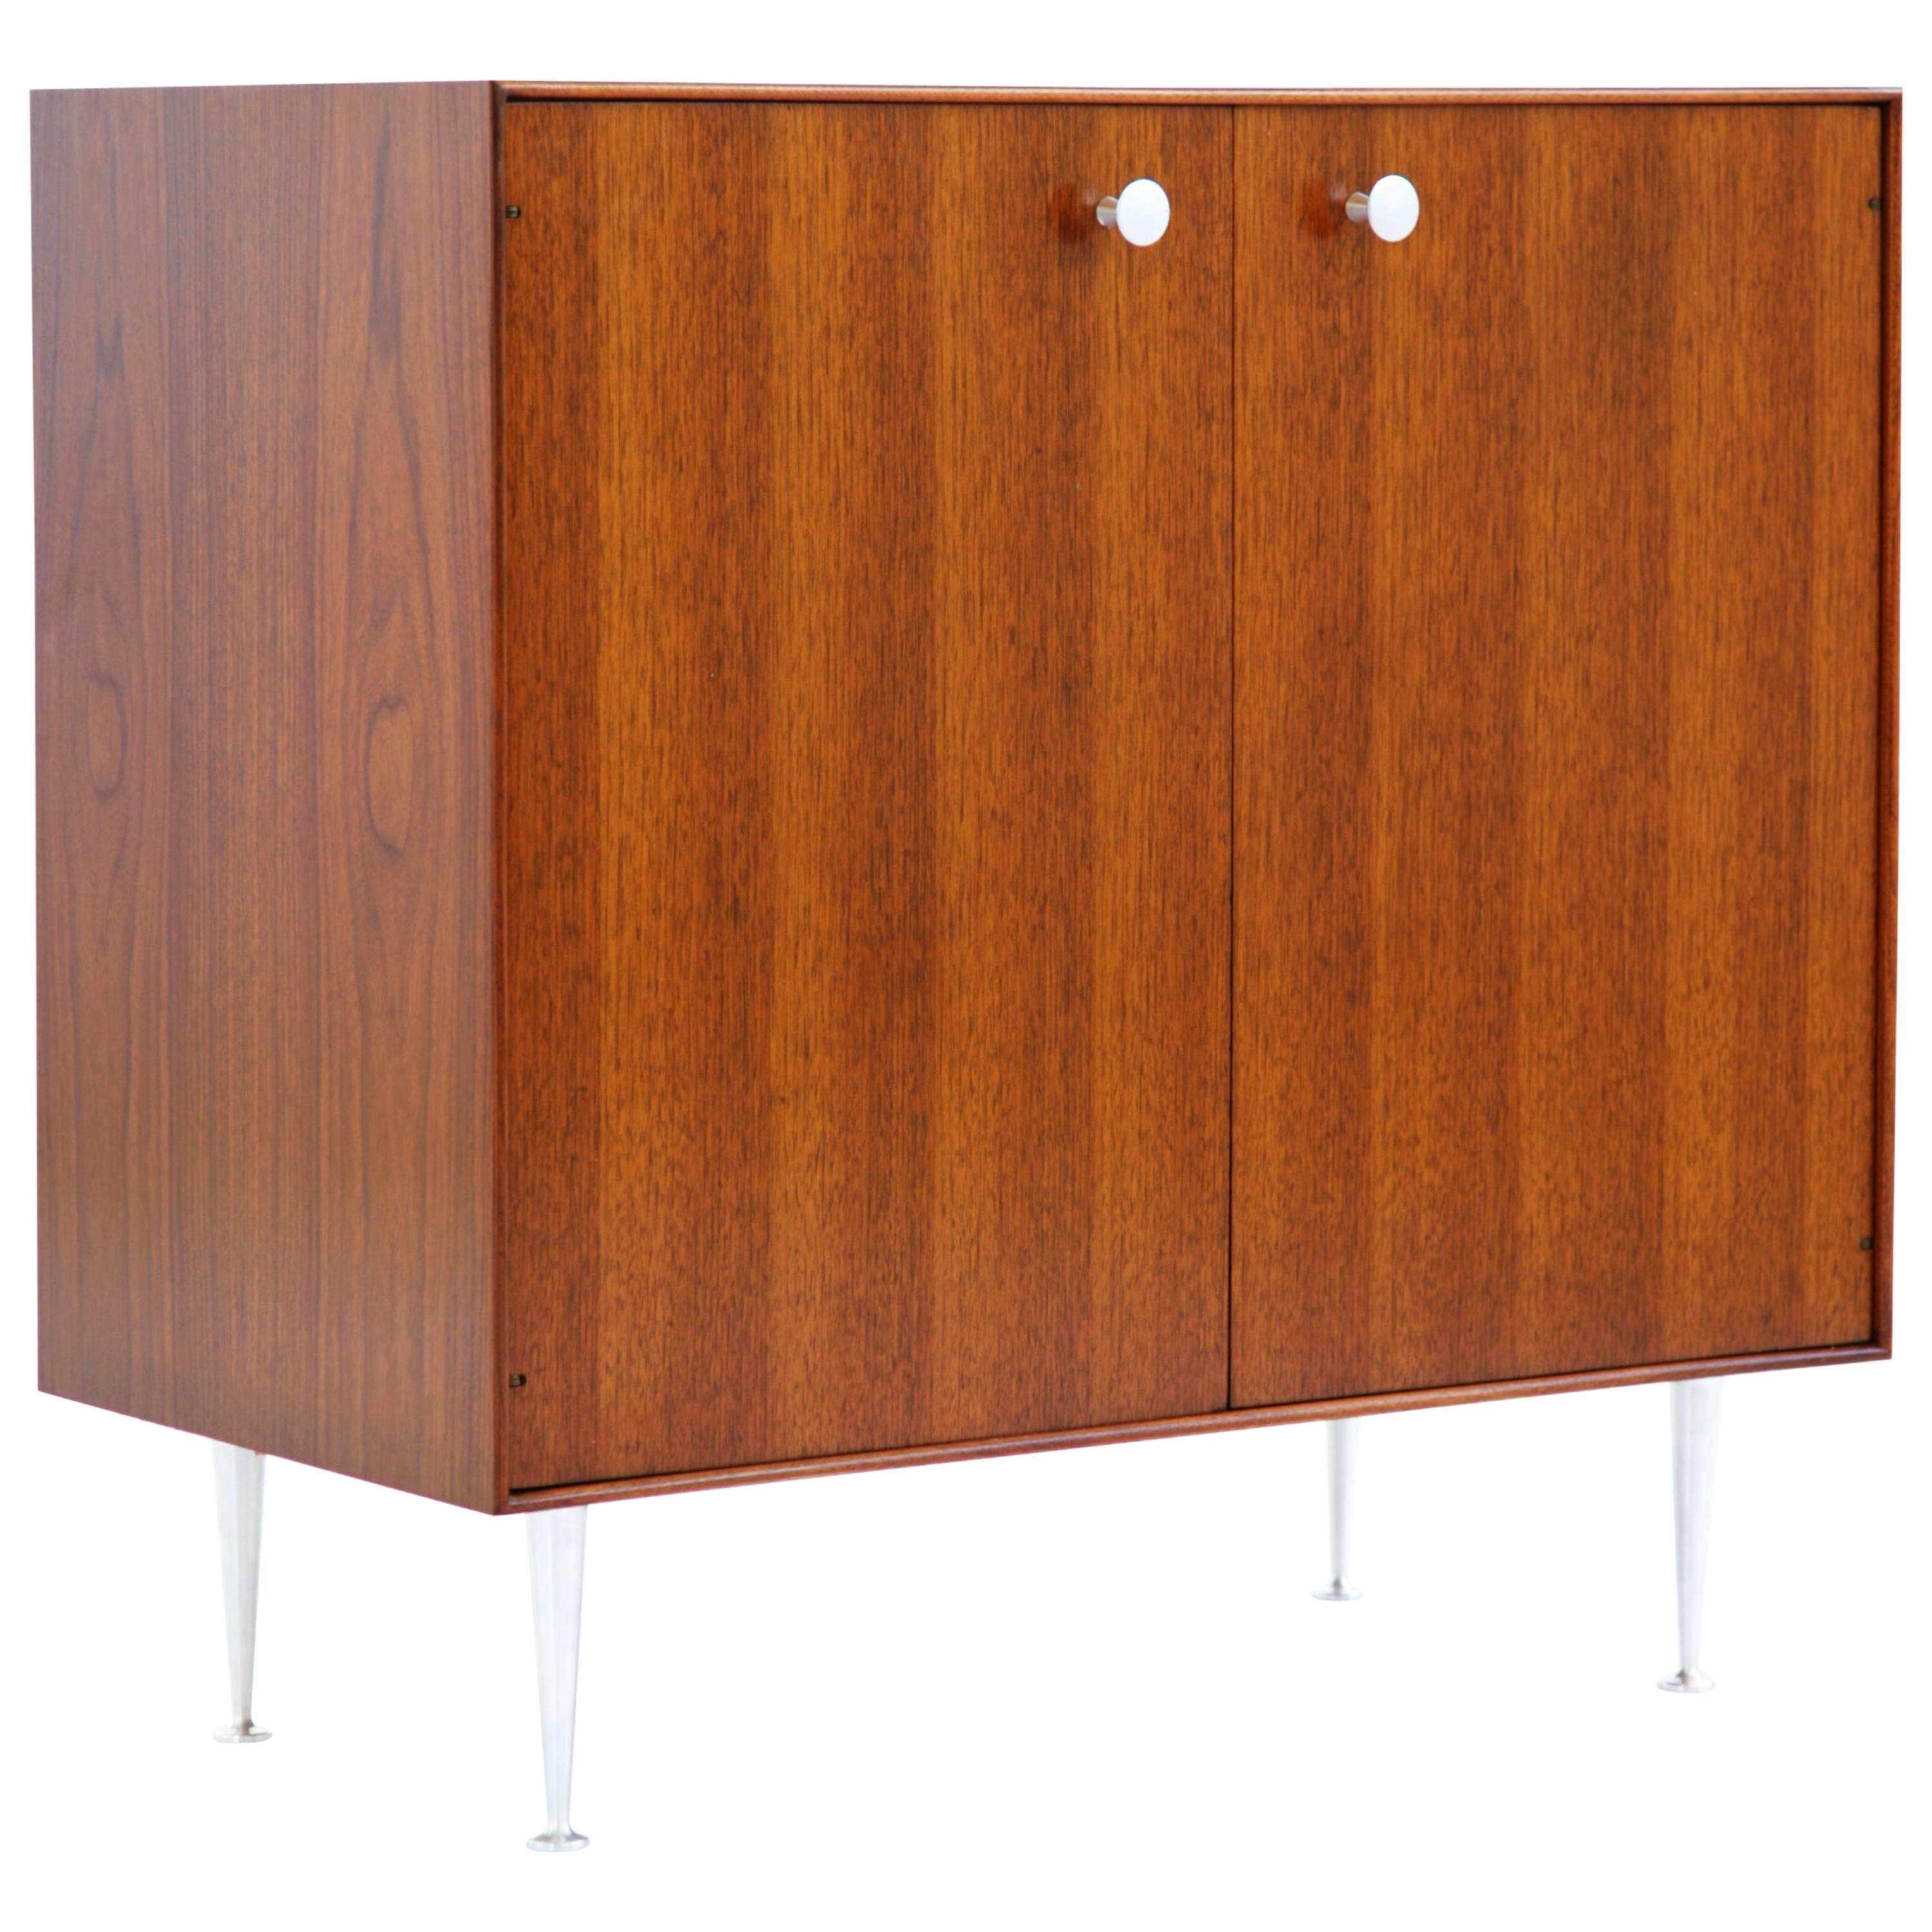 George Nelson "Thin Edge" Cabinet 